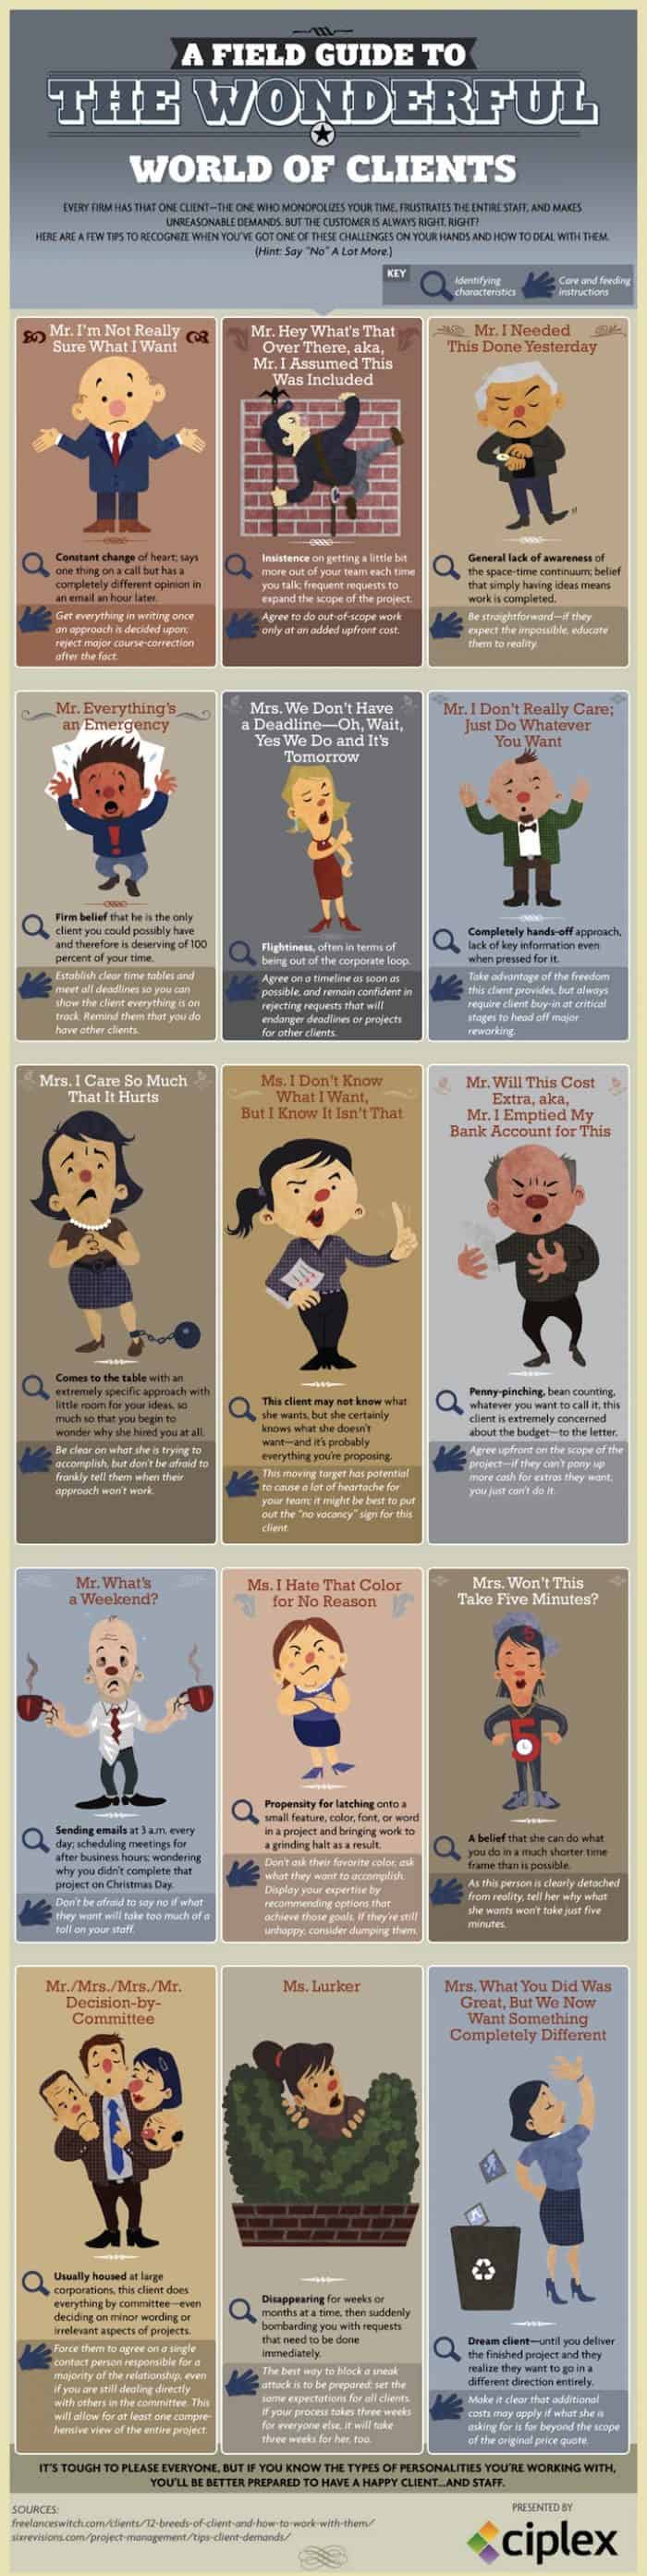 Infographic on how to deal with challenging clients and their personalities, how to deal with difficult clients, how to make clients happy